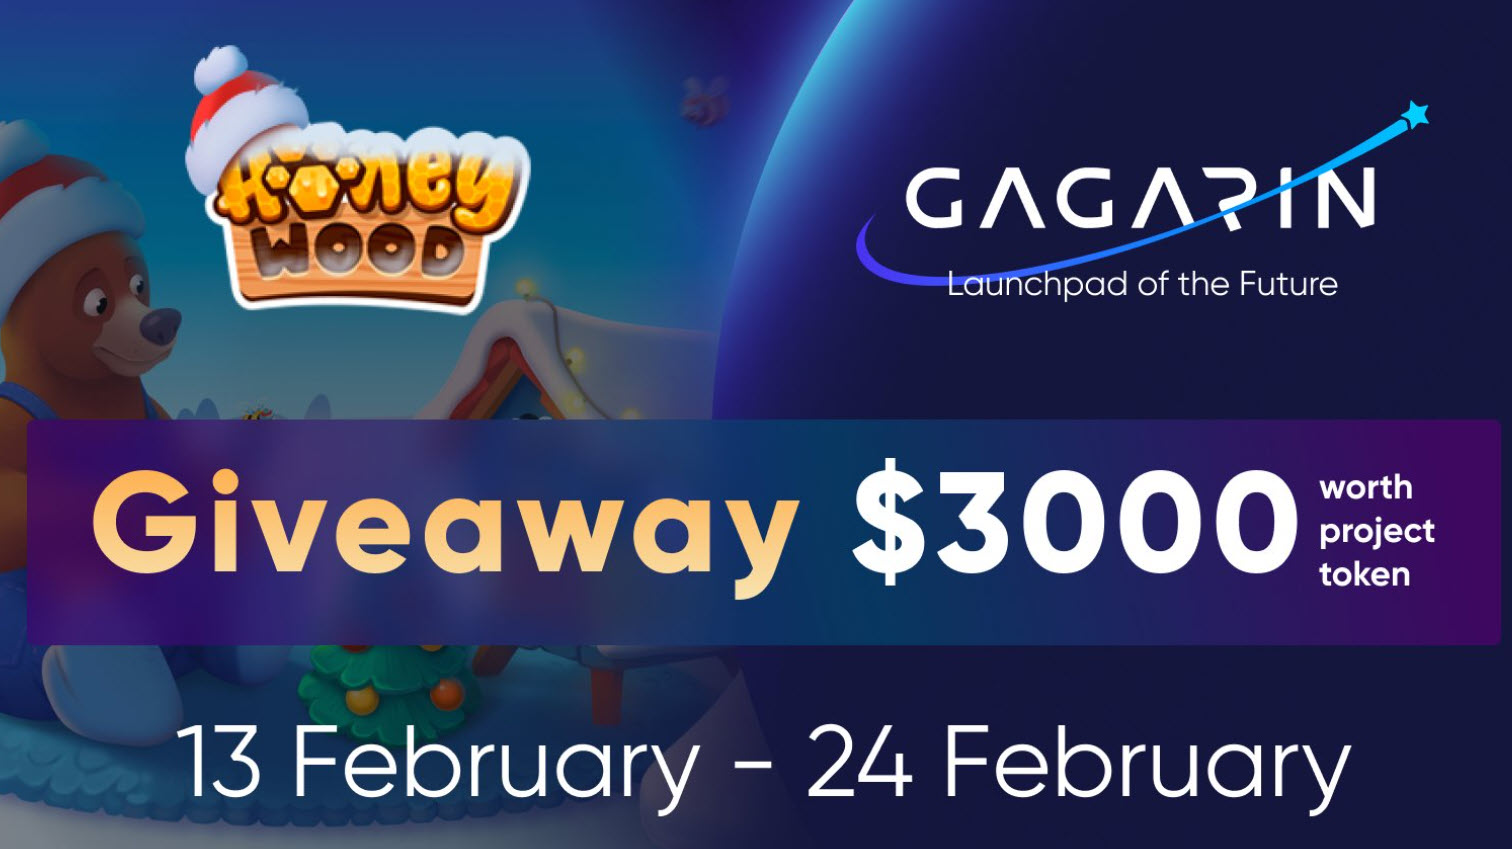 On the occasion of the @HoneyWood_Game on @GAGARIN_World- $3000 #giveaway!